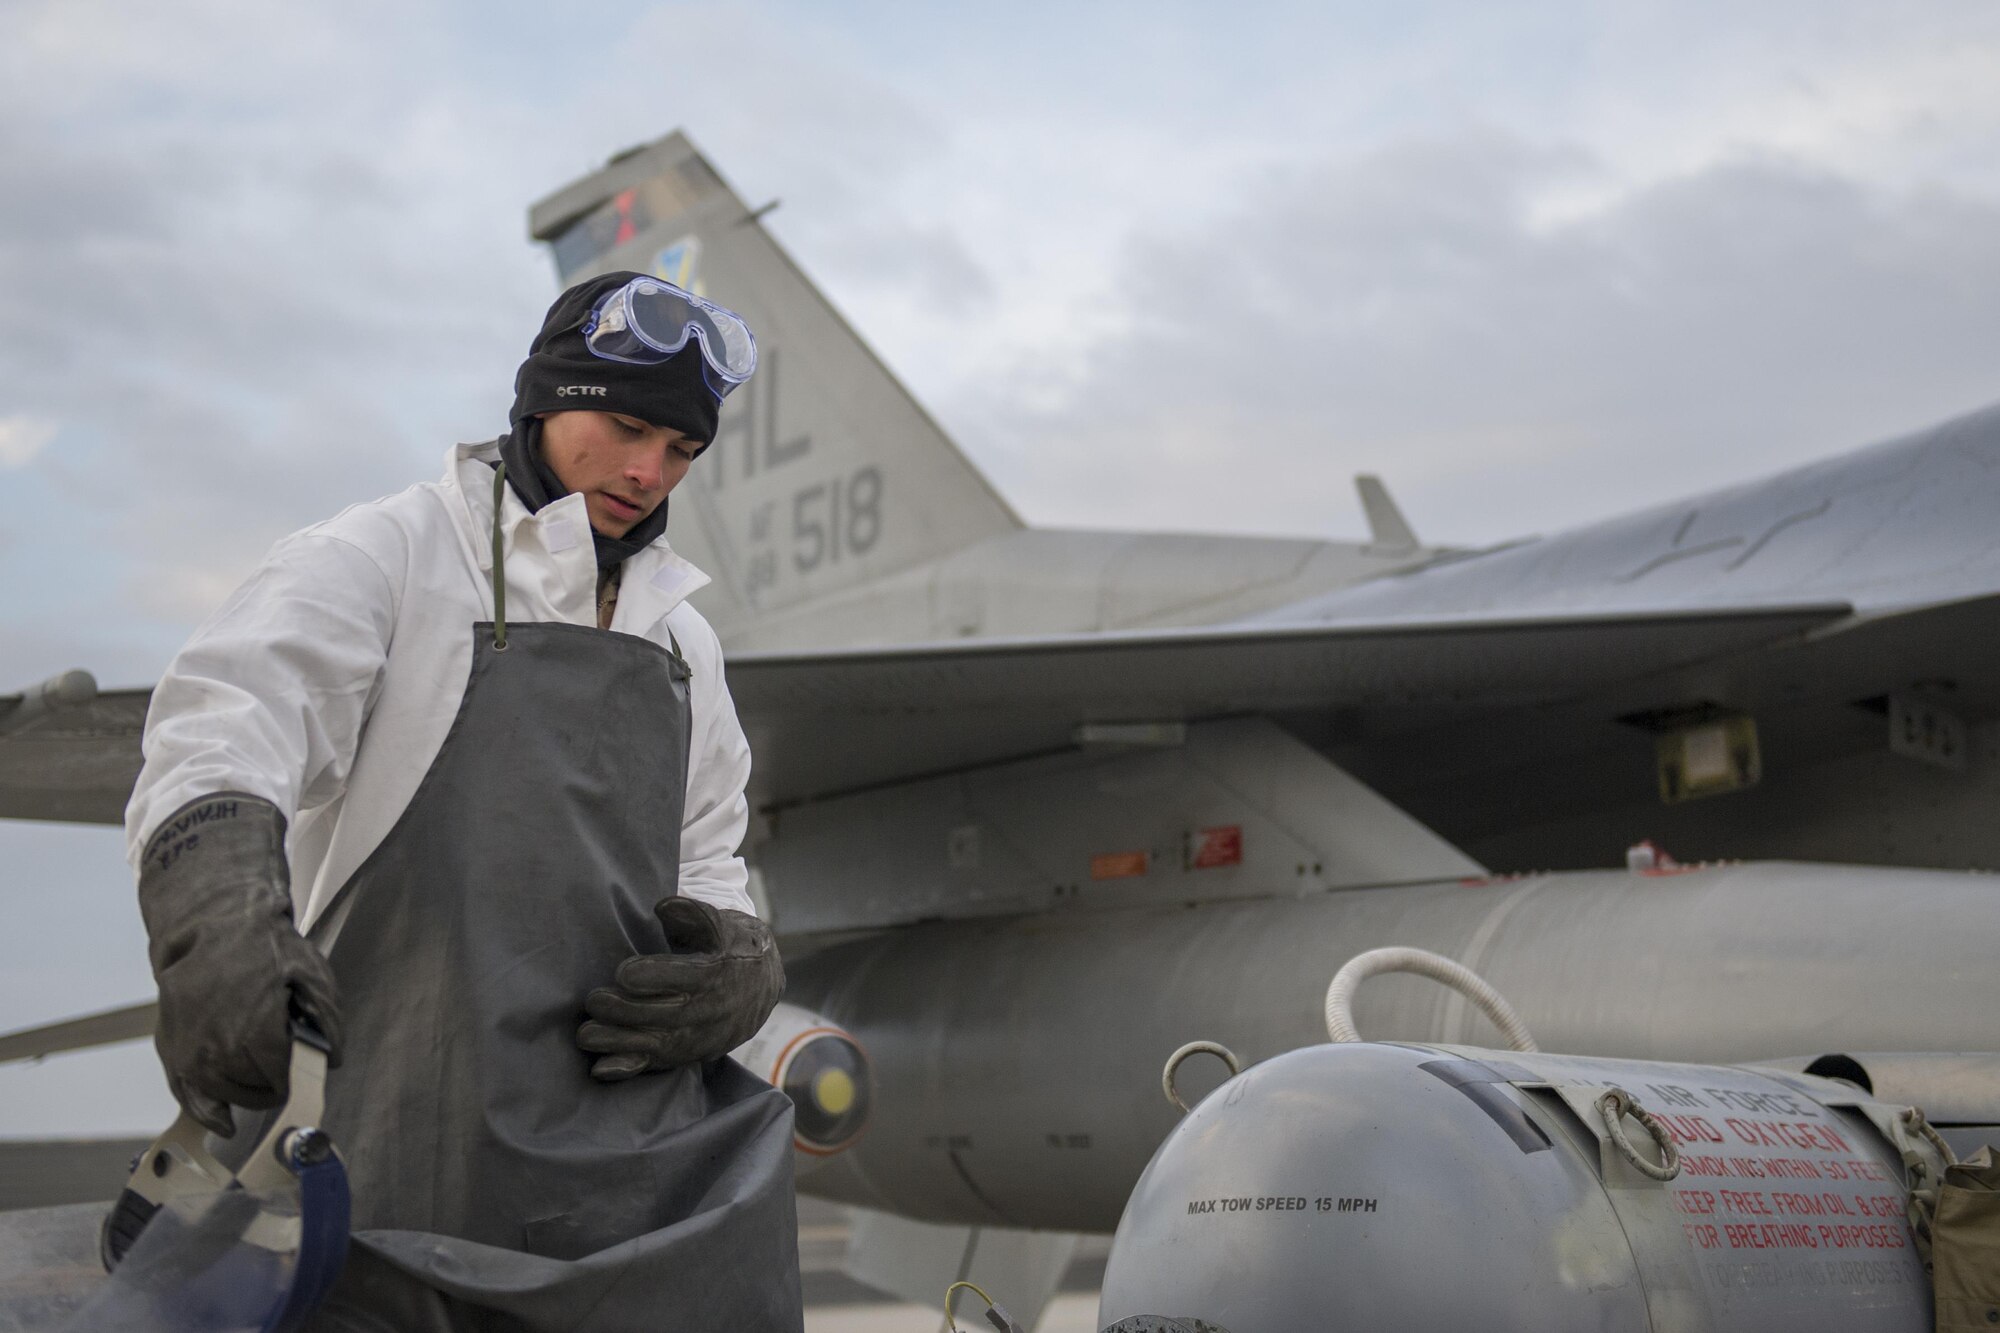 Airman 1st Class Frank Lopez, 455th Expeditionary Aircraft Maintenance Squadron dedicated crew chief, collects his equipment after filling the liquid oxygen tank on an F-16 Fighting Falcon at Bagram Airfield, Afghanistan, Jan. 06, 2016. The 455th EAMXS provides combat-ready aircraft to the air component commander in support of coalition forces throughout Afghanistan.  (U.S. Air Force photo/Tech. Sgt. Robert Cloys)